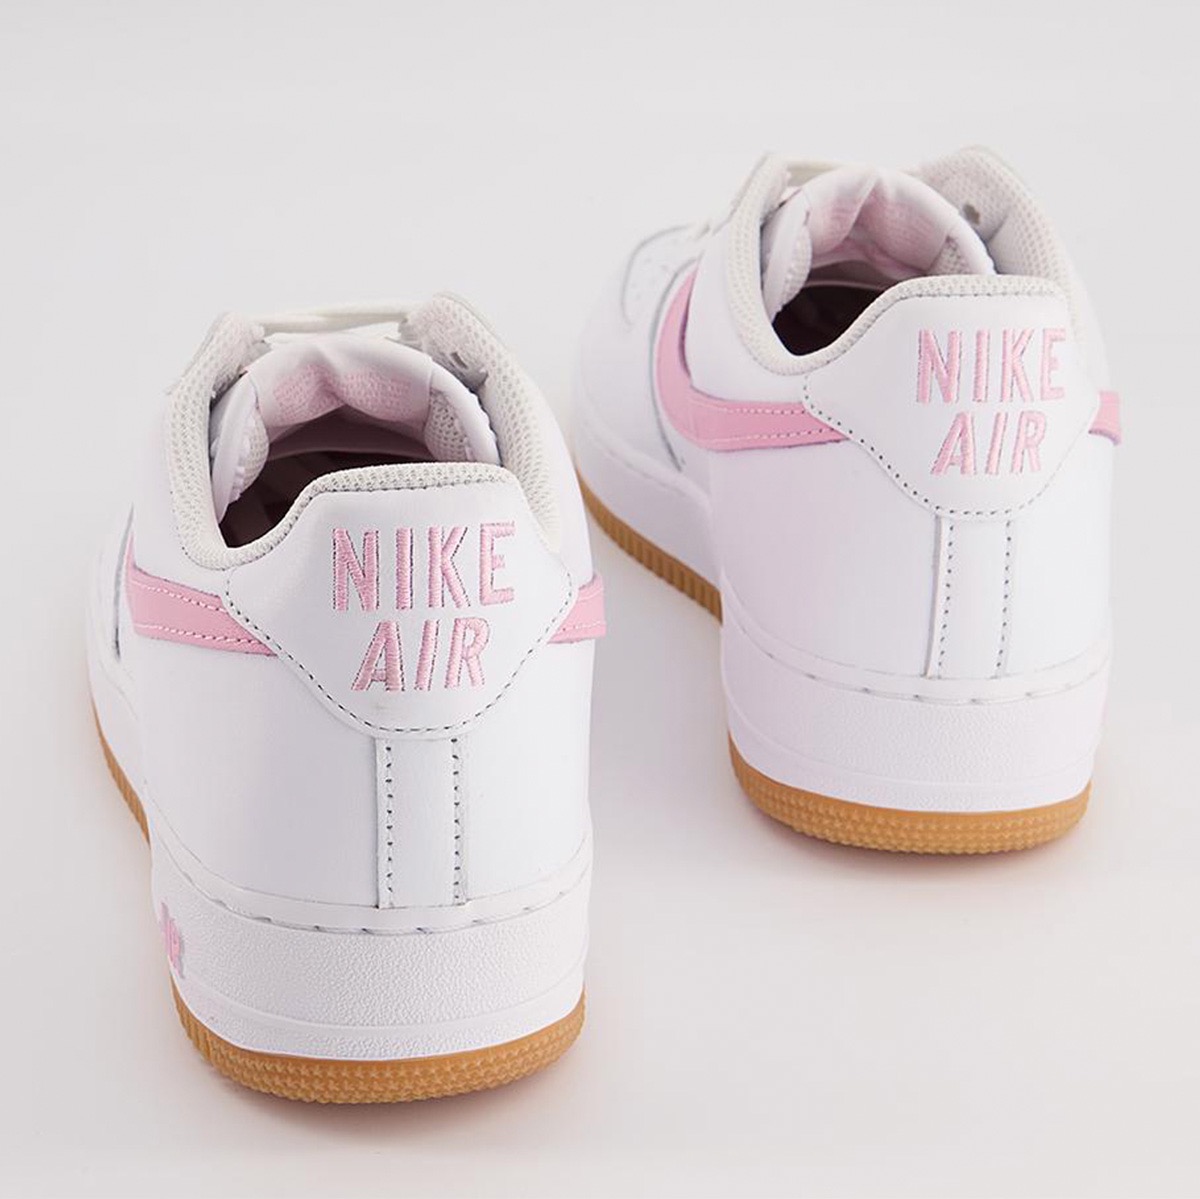 Nike Air Force 1 Low Since 82 White Pink Gum DM0576-101 Release Date